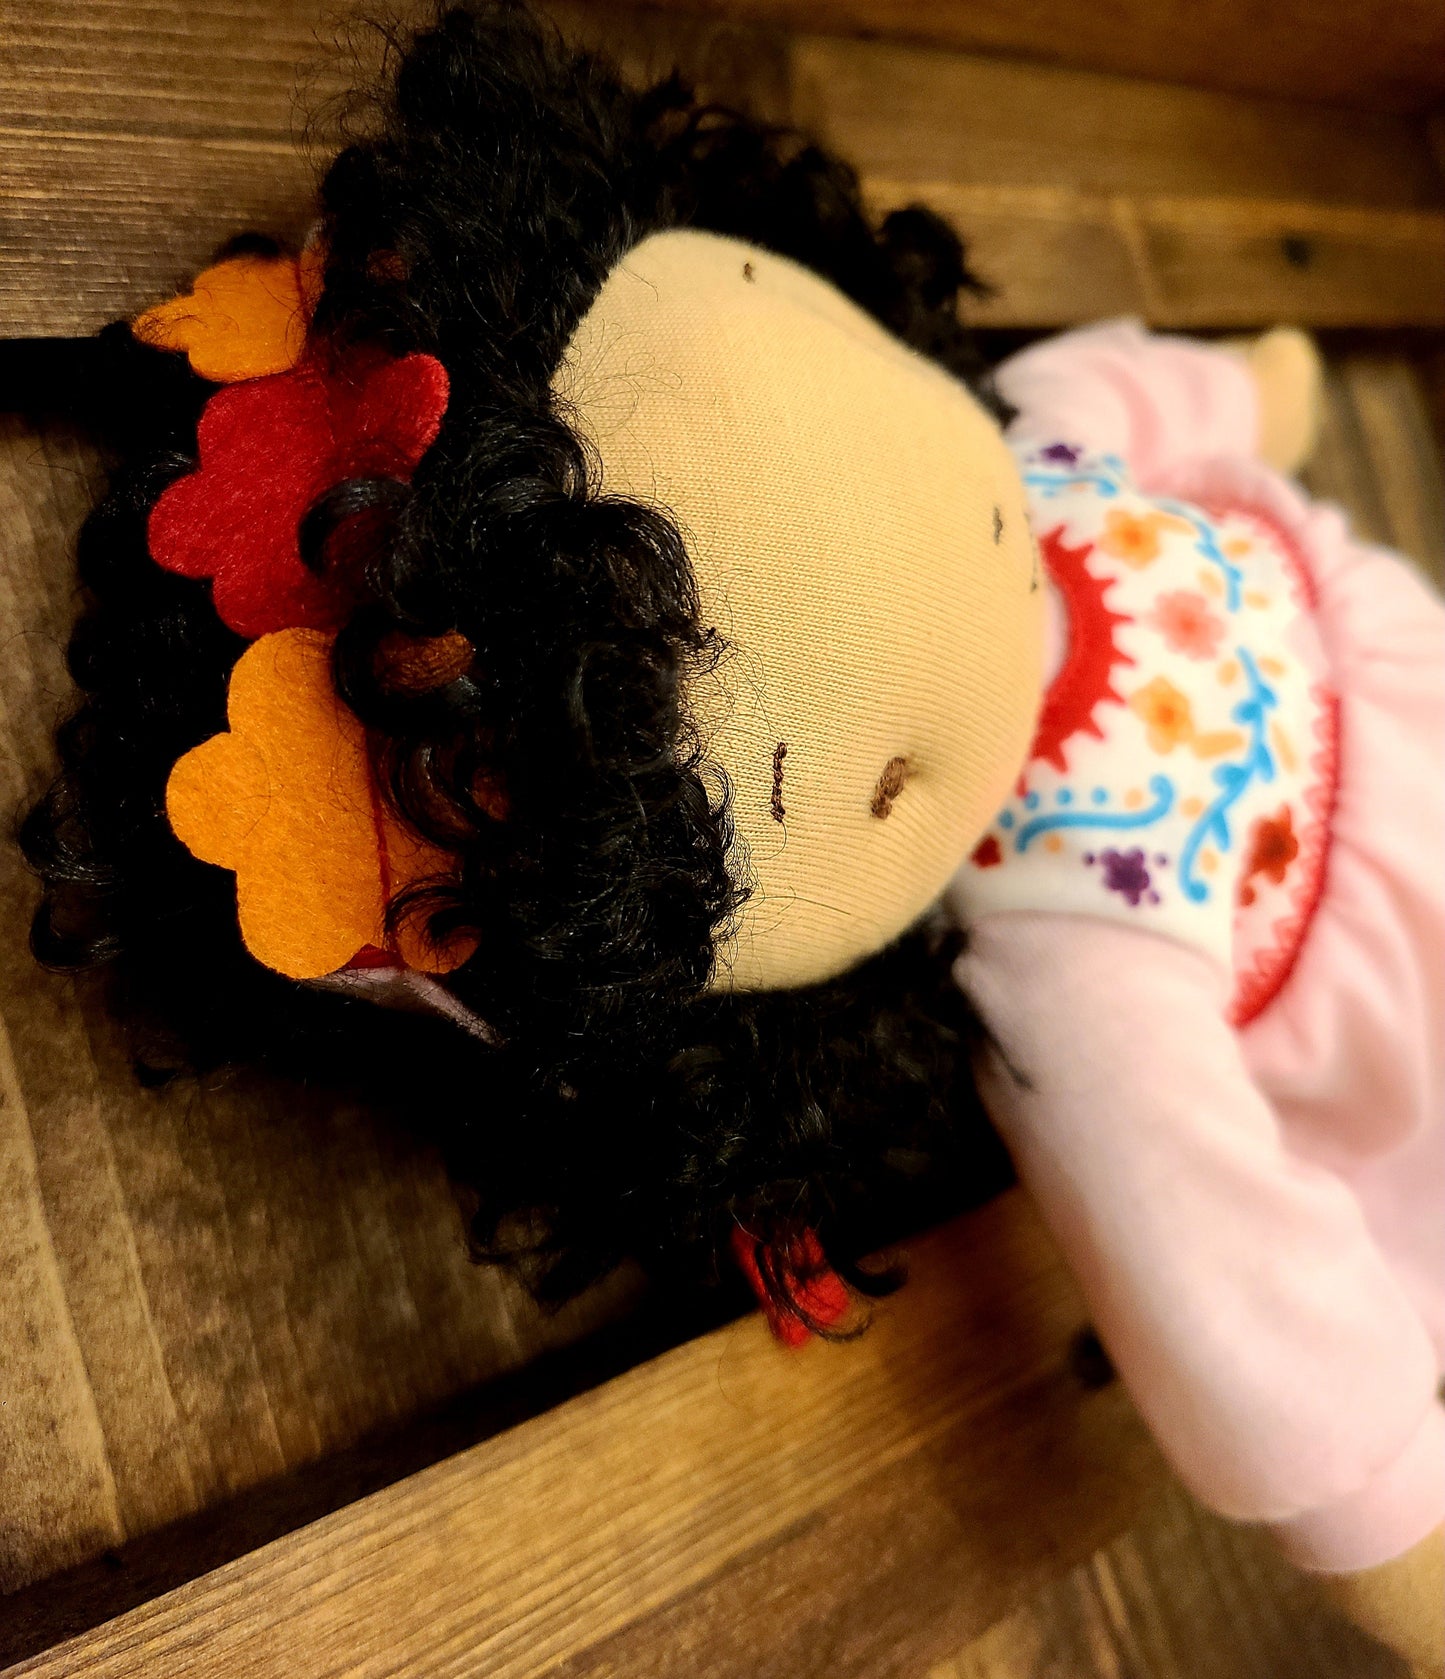 Personalized Soft Rag 12in Floral Dress Girl Plush Doll Toy/Handmade Baby Gift Toy/Global Sister